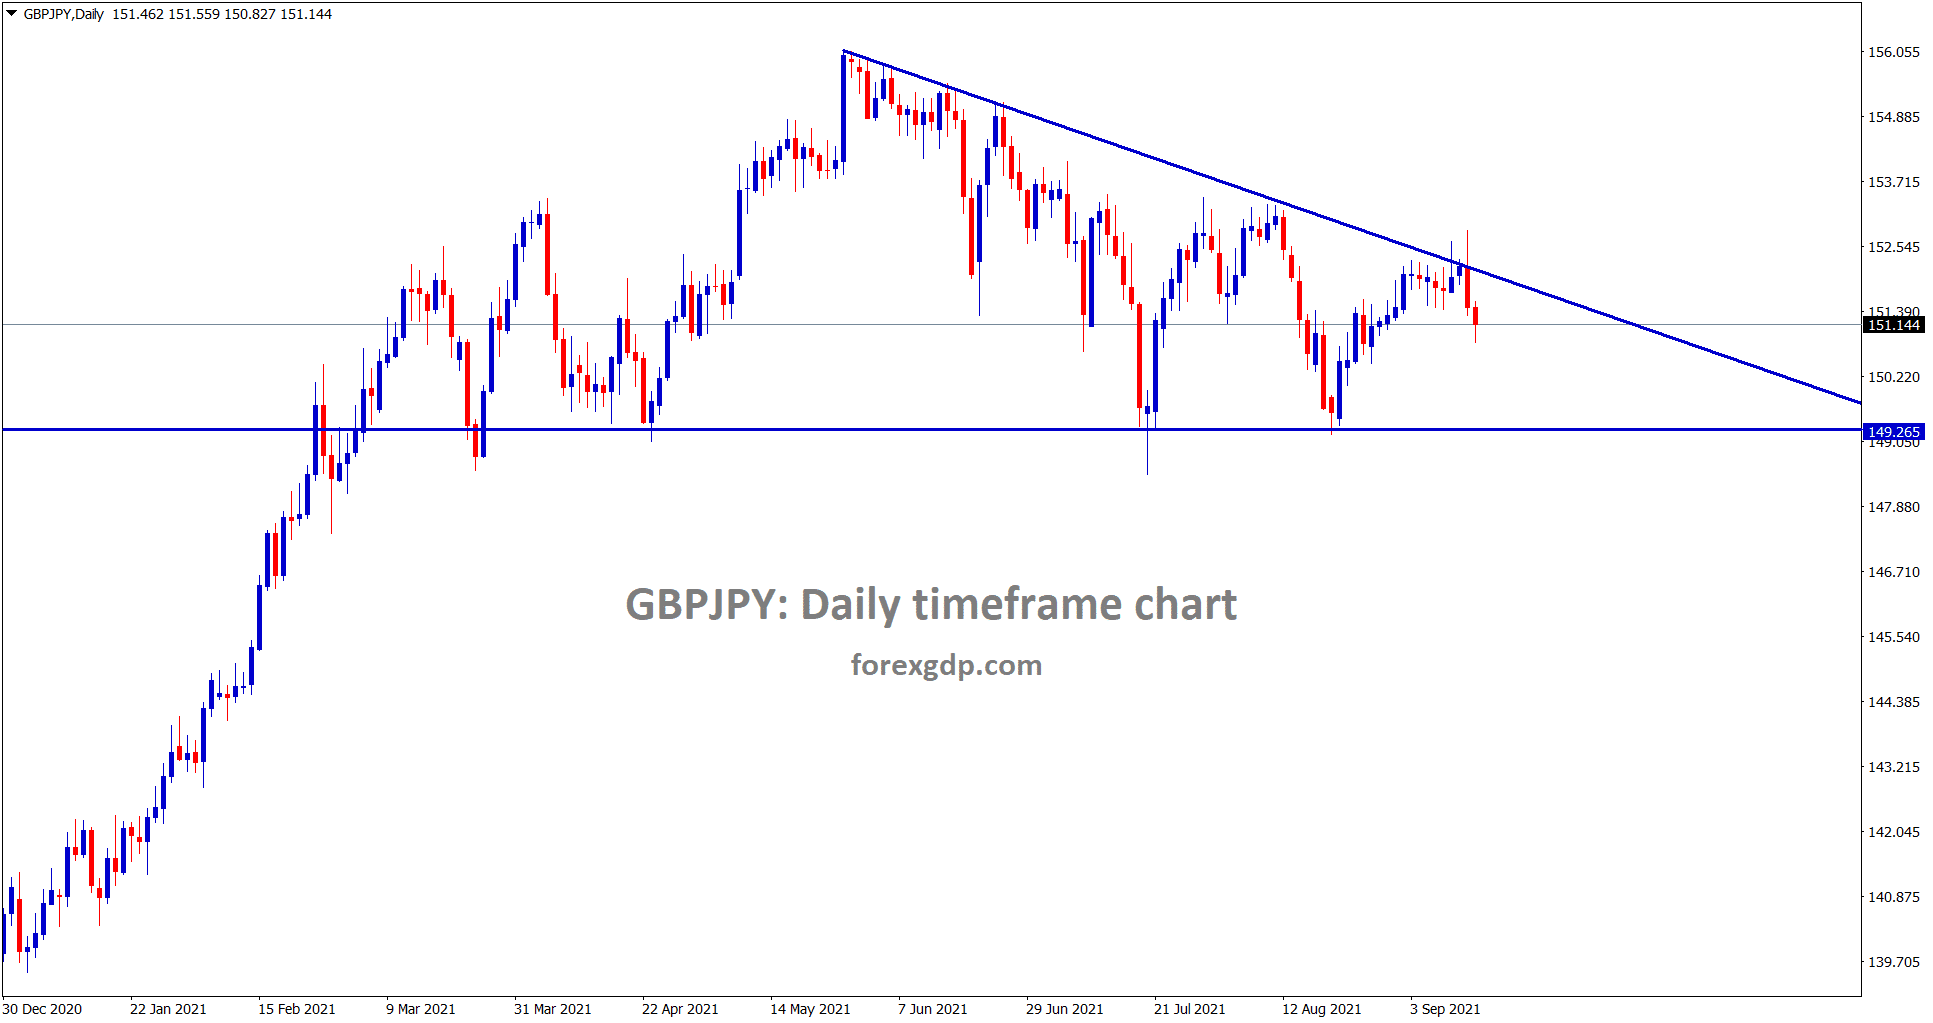 GBPJPY is falling from the top looks like Descending Triangle pattern